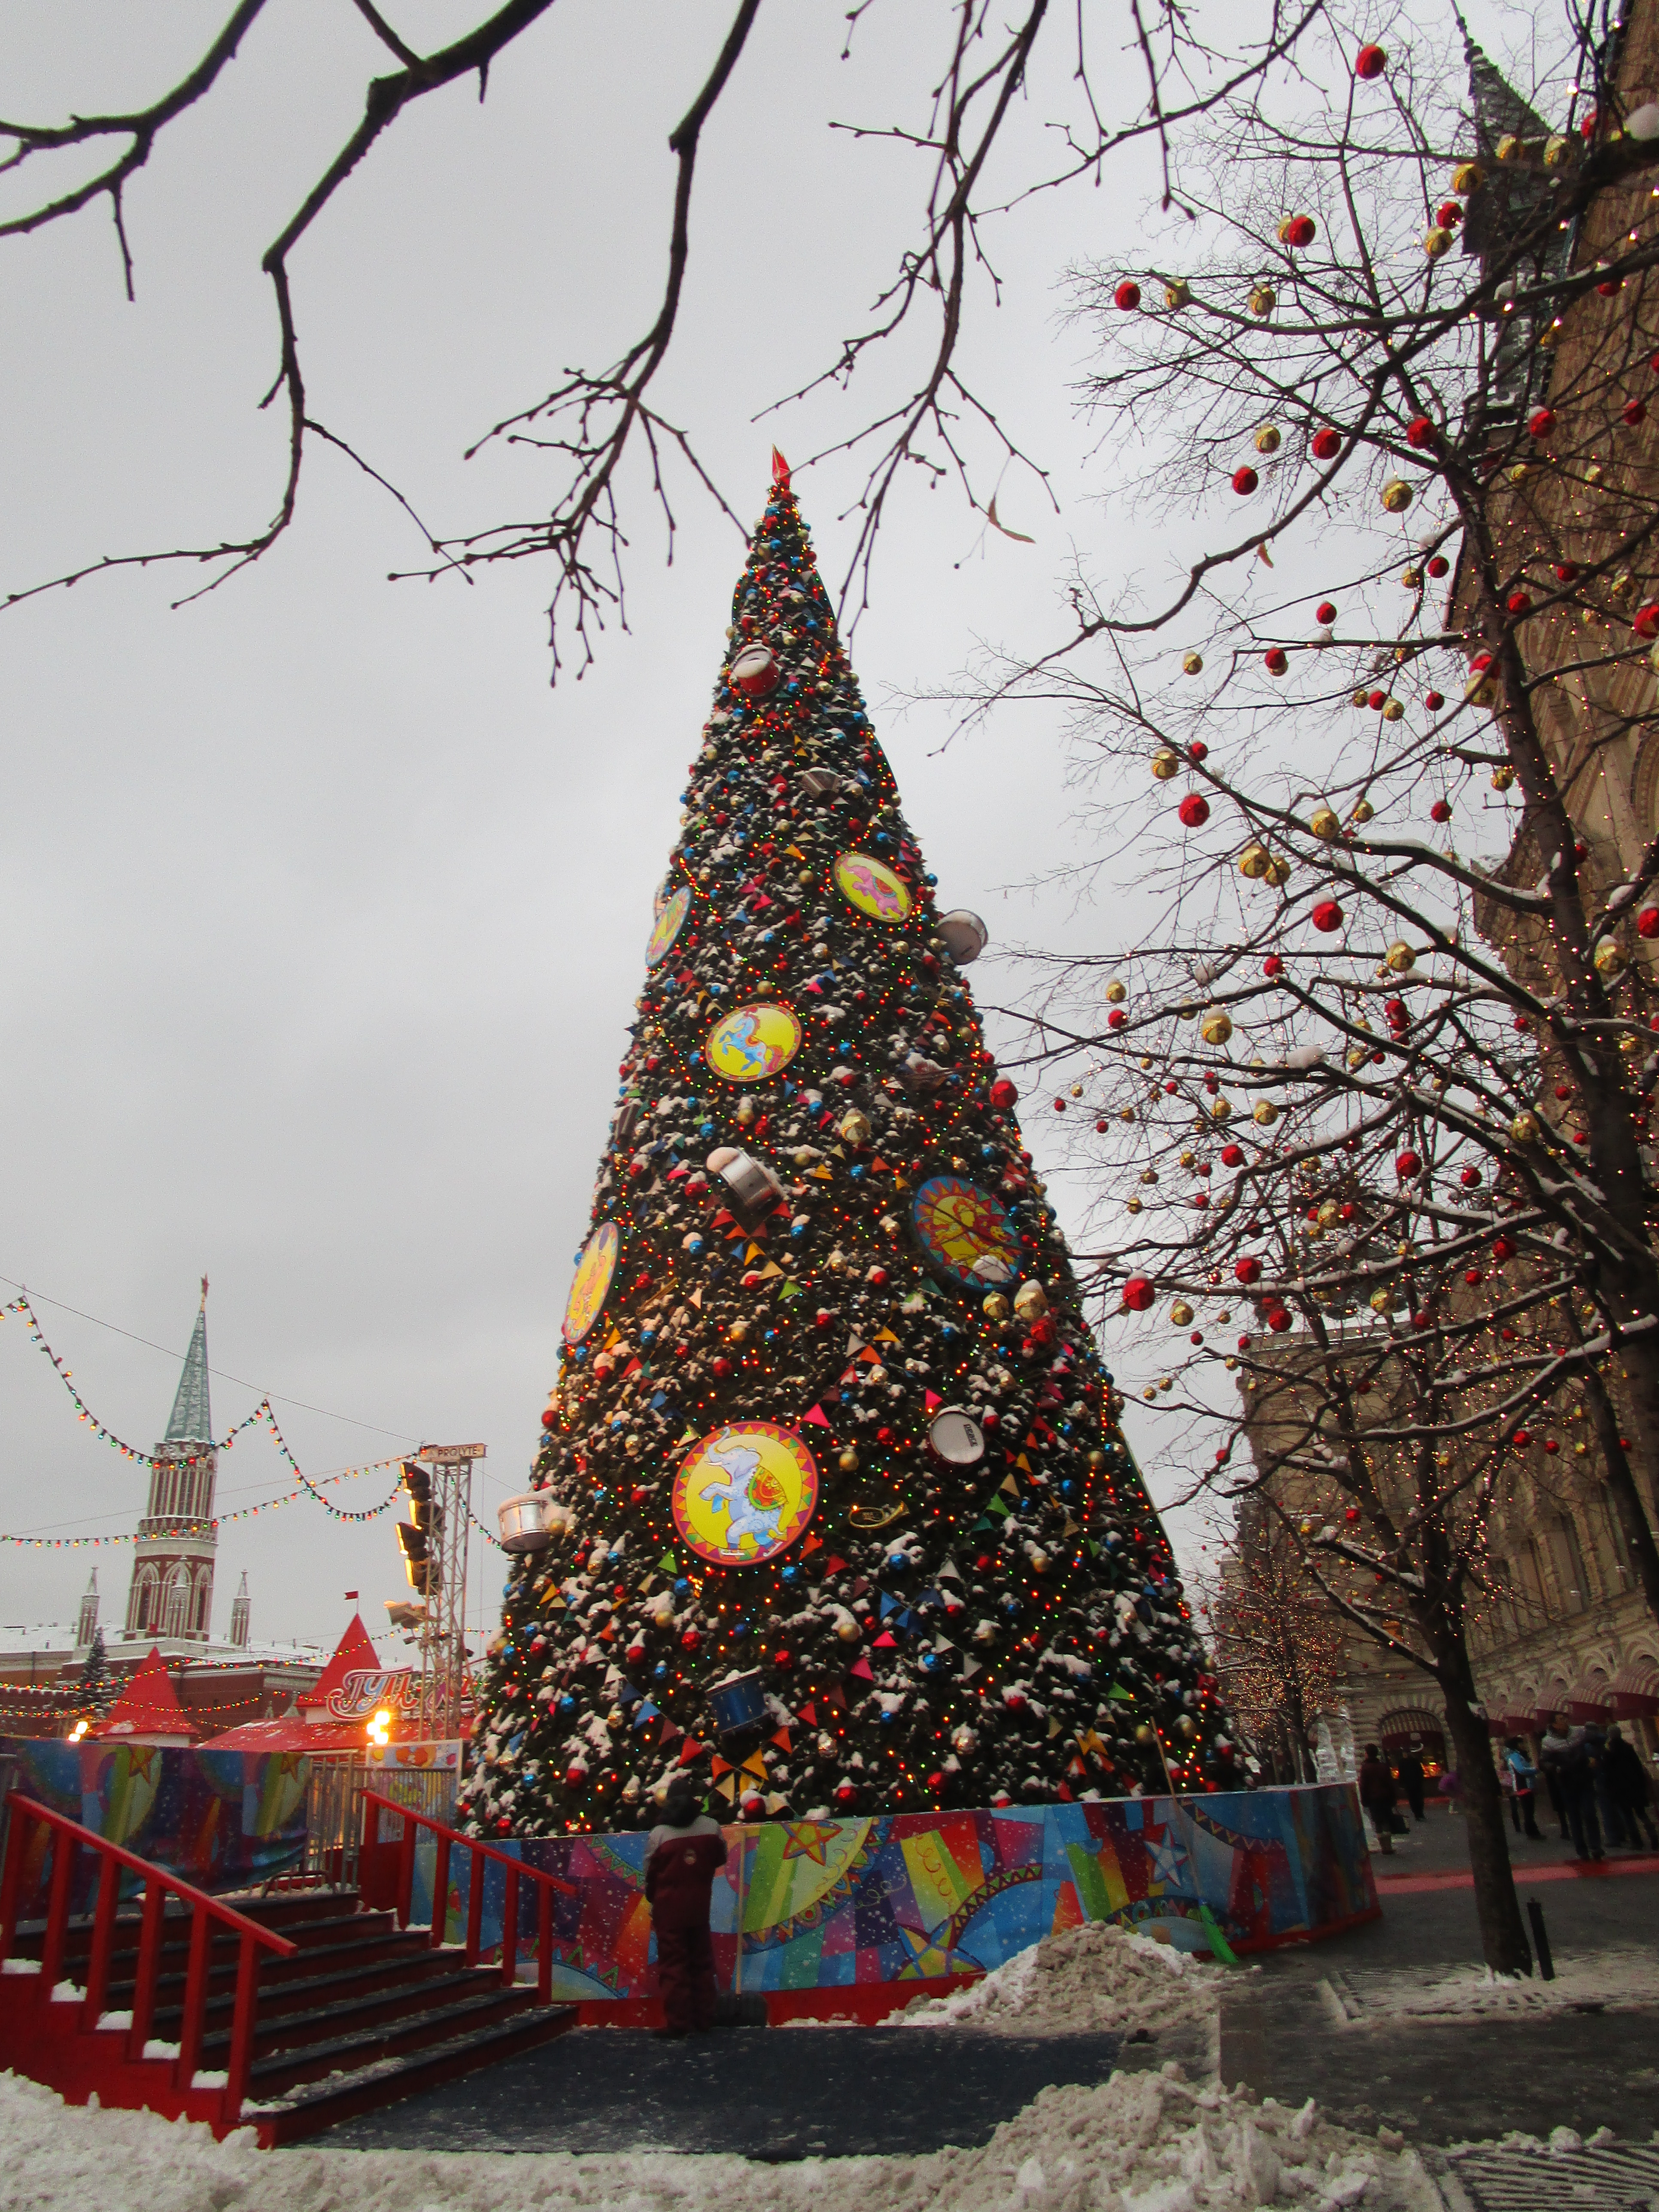 New Year's Tree on Red Square in Moscow, Russia. Photo taken on December 13, 2014.